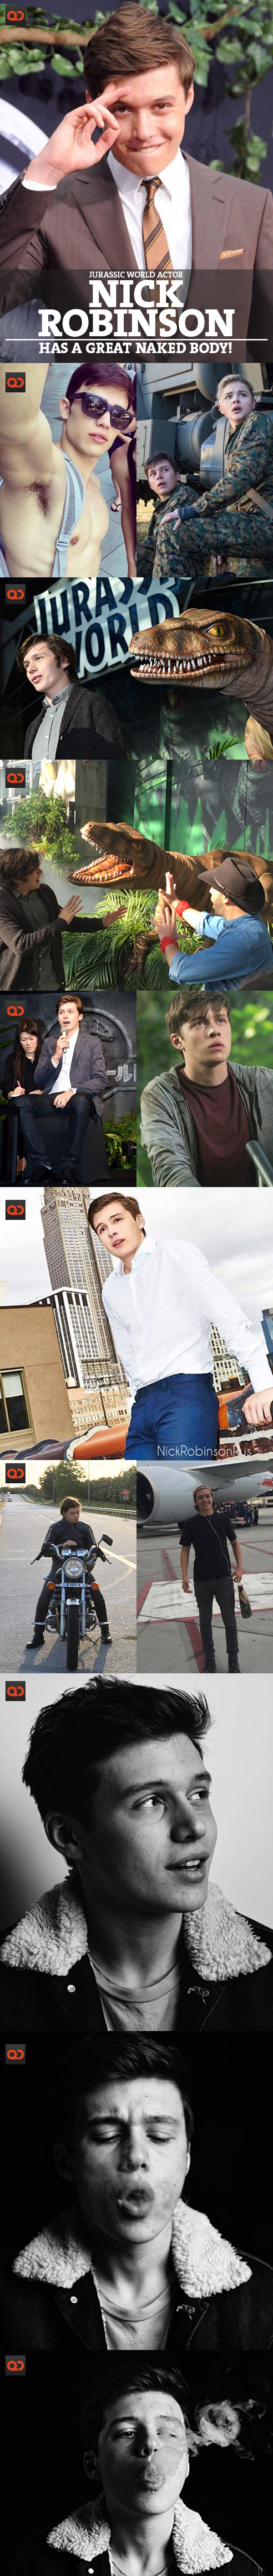 Jurassic World Actor Nick Robinson Has A Great Naked Body!